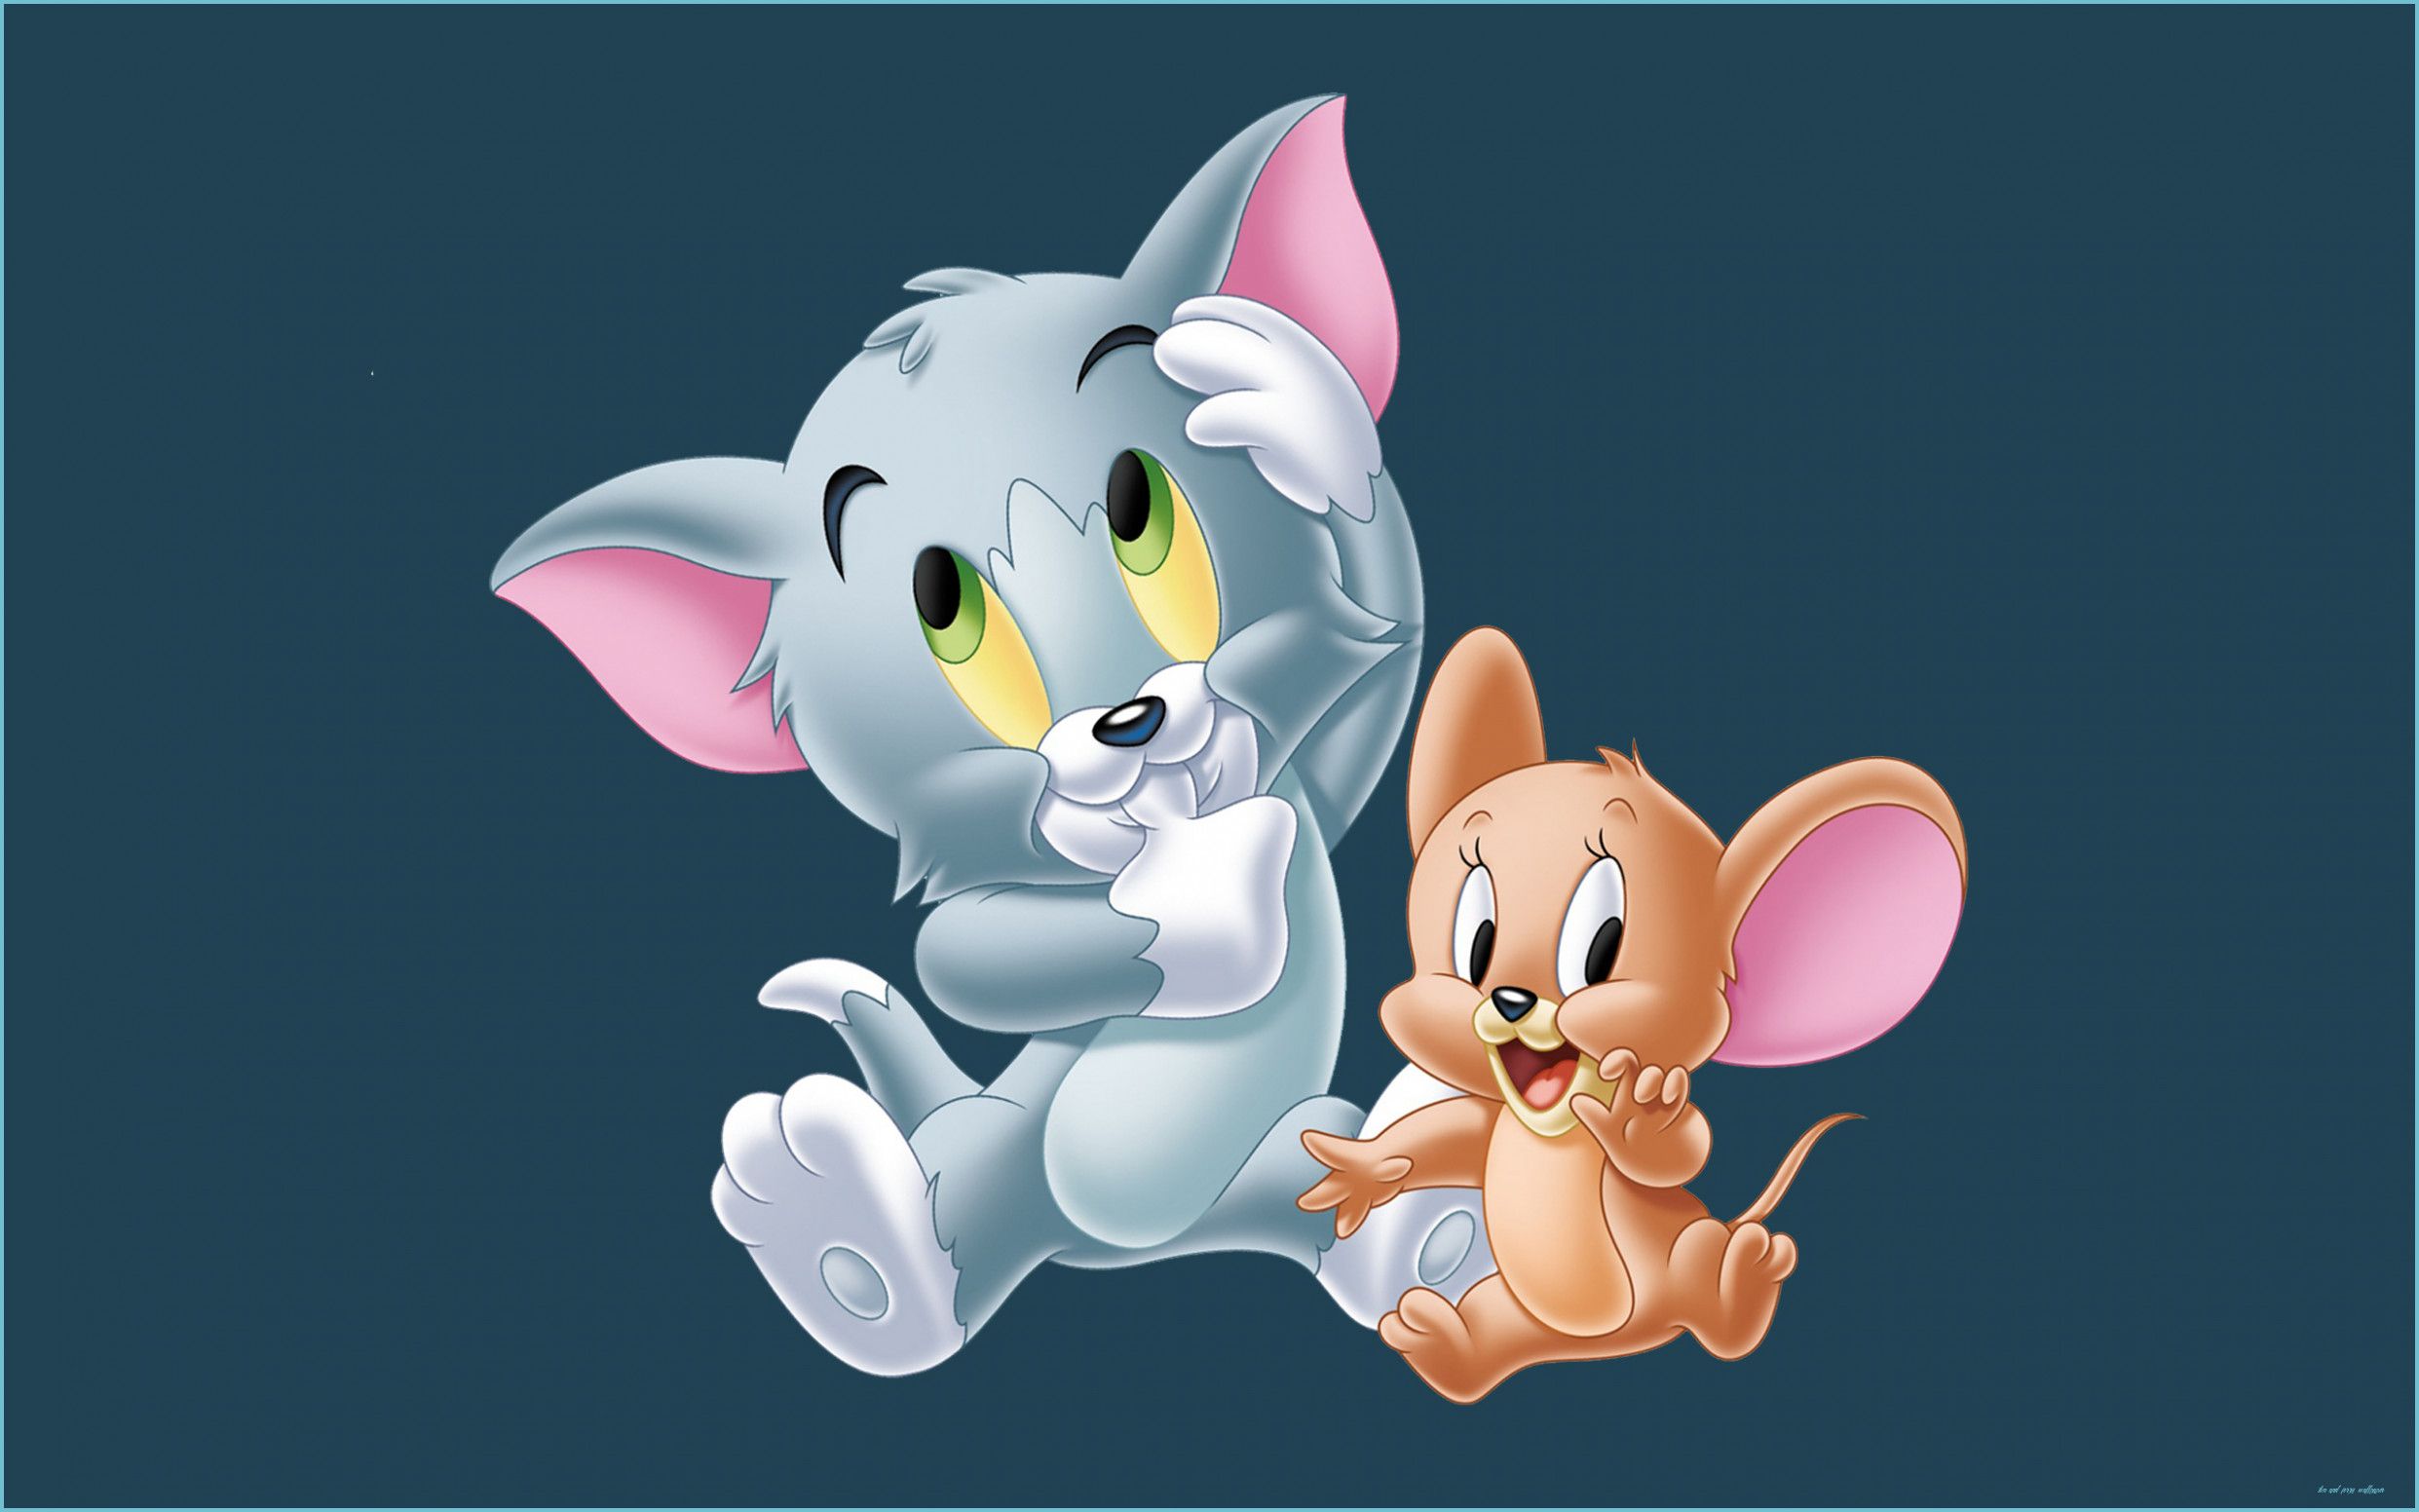 Is Tom And Jerry Wallpaper Any Good? 12 Ways You Can Be